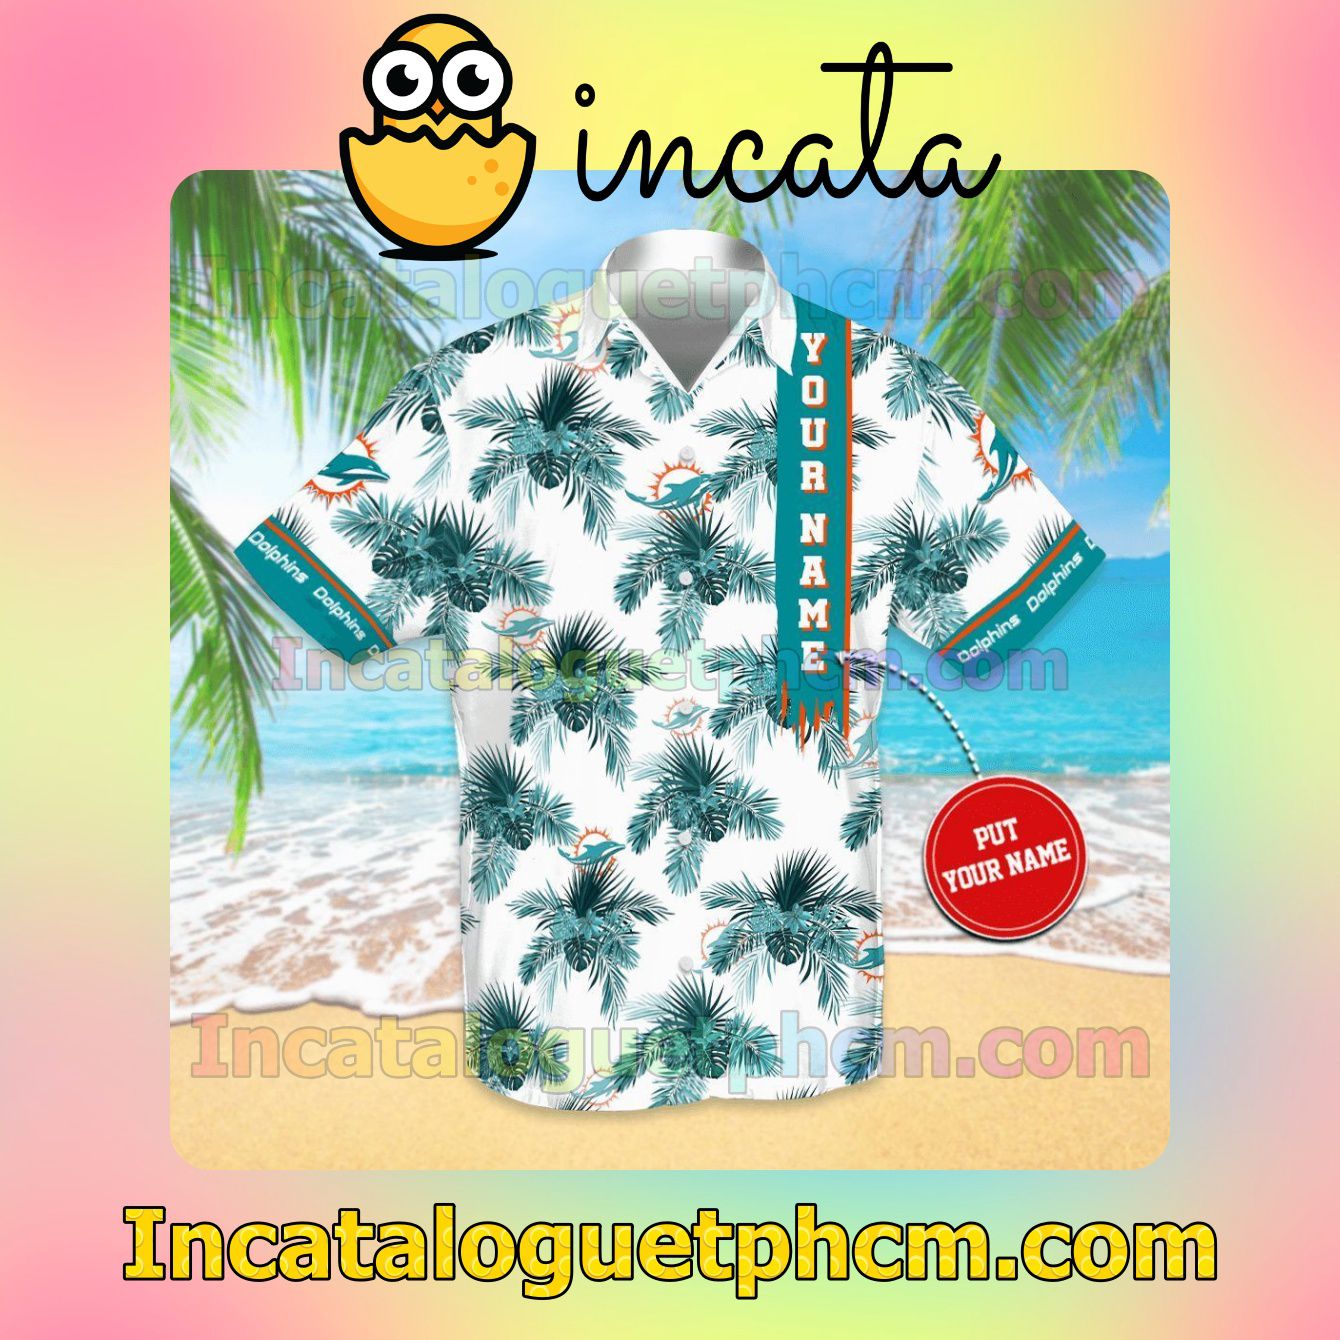 Personalized Miami Dolphins Football Team Button Shirt And Swim Trunk